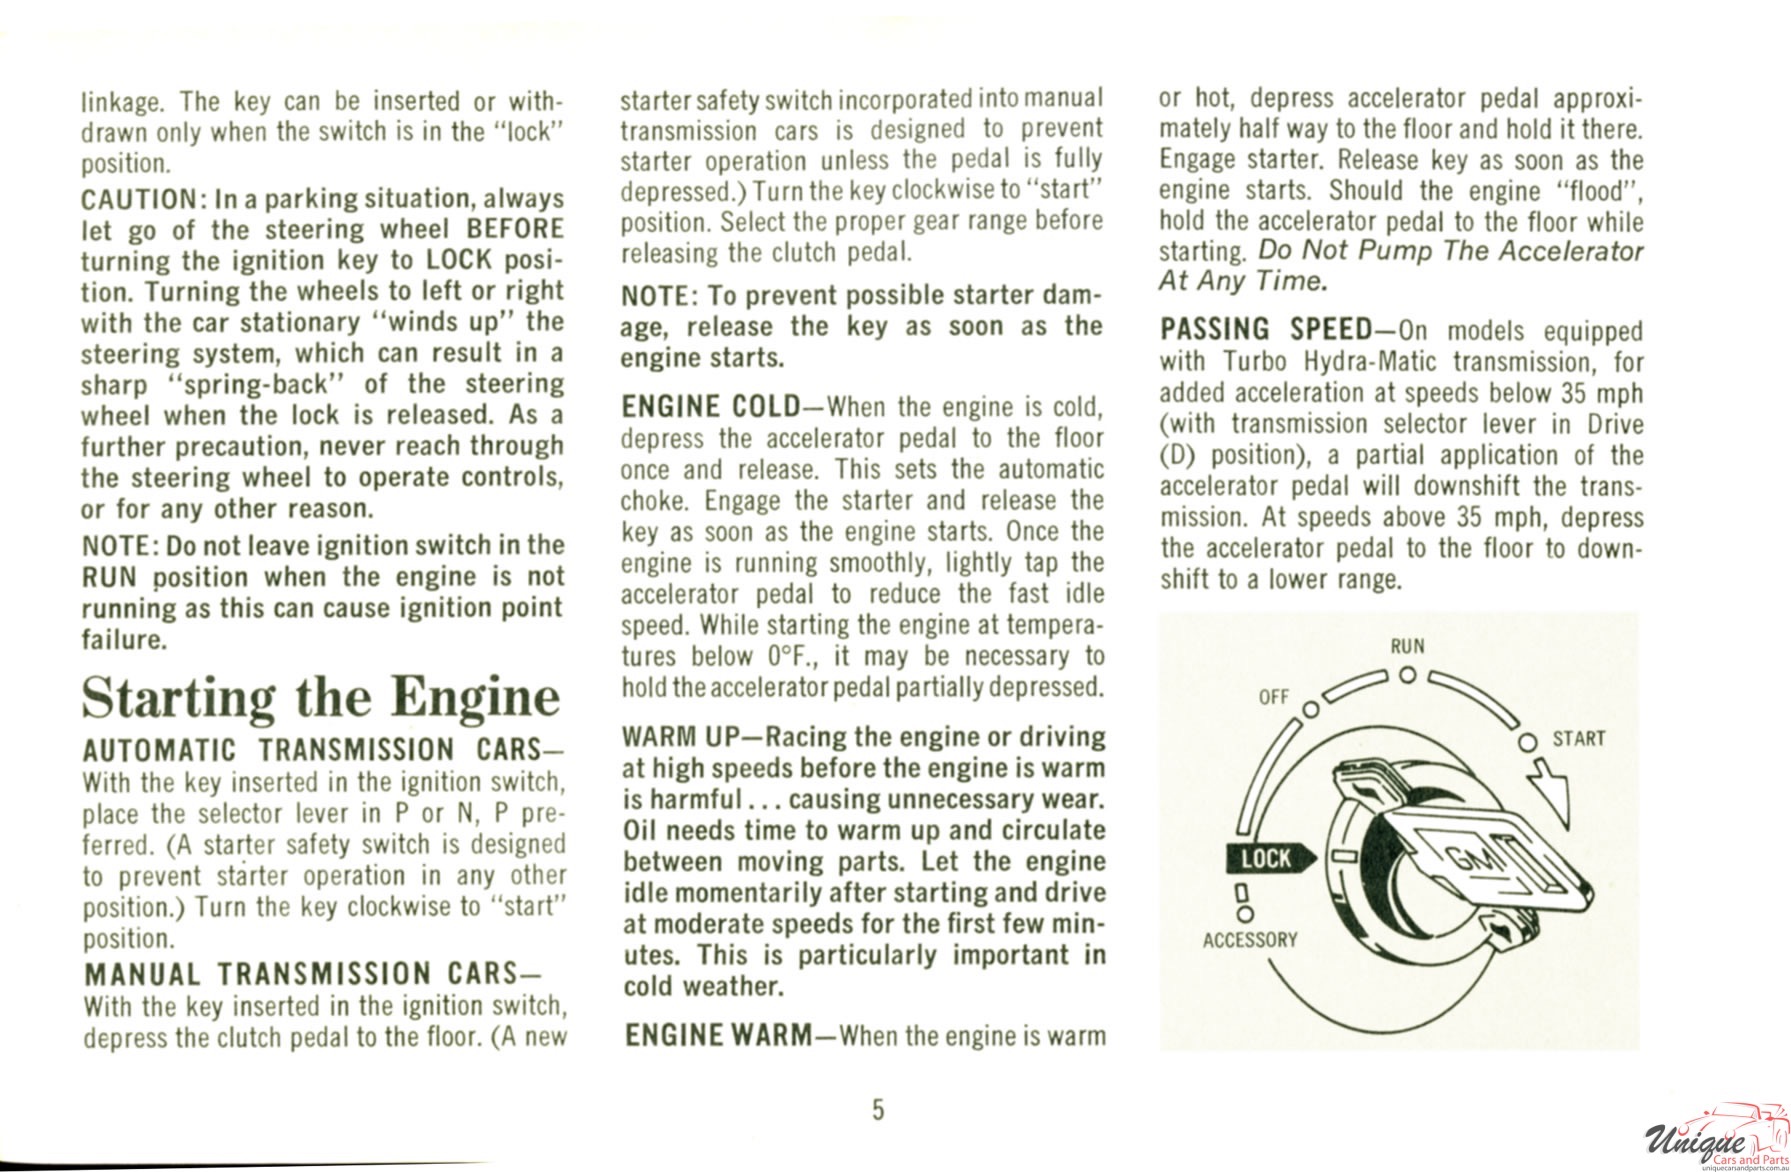 1969 Pontiac Owners Manual Page 61